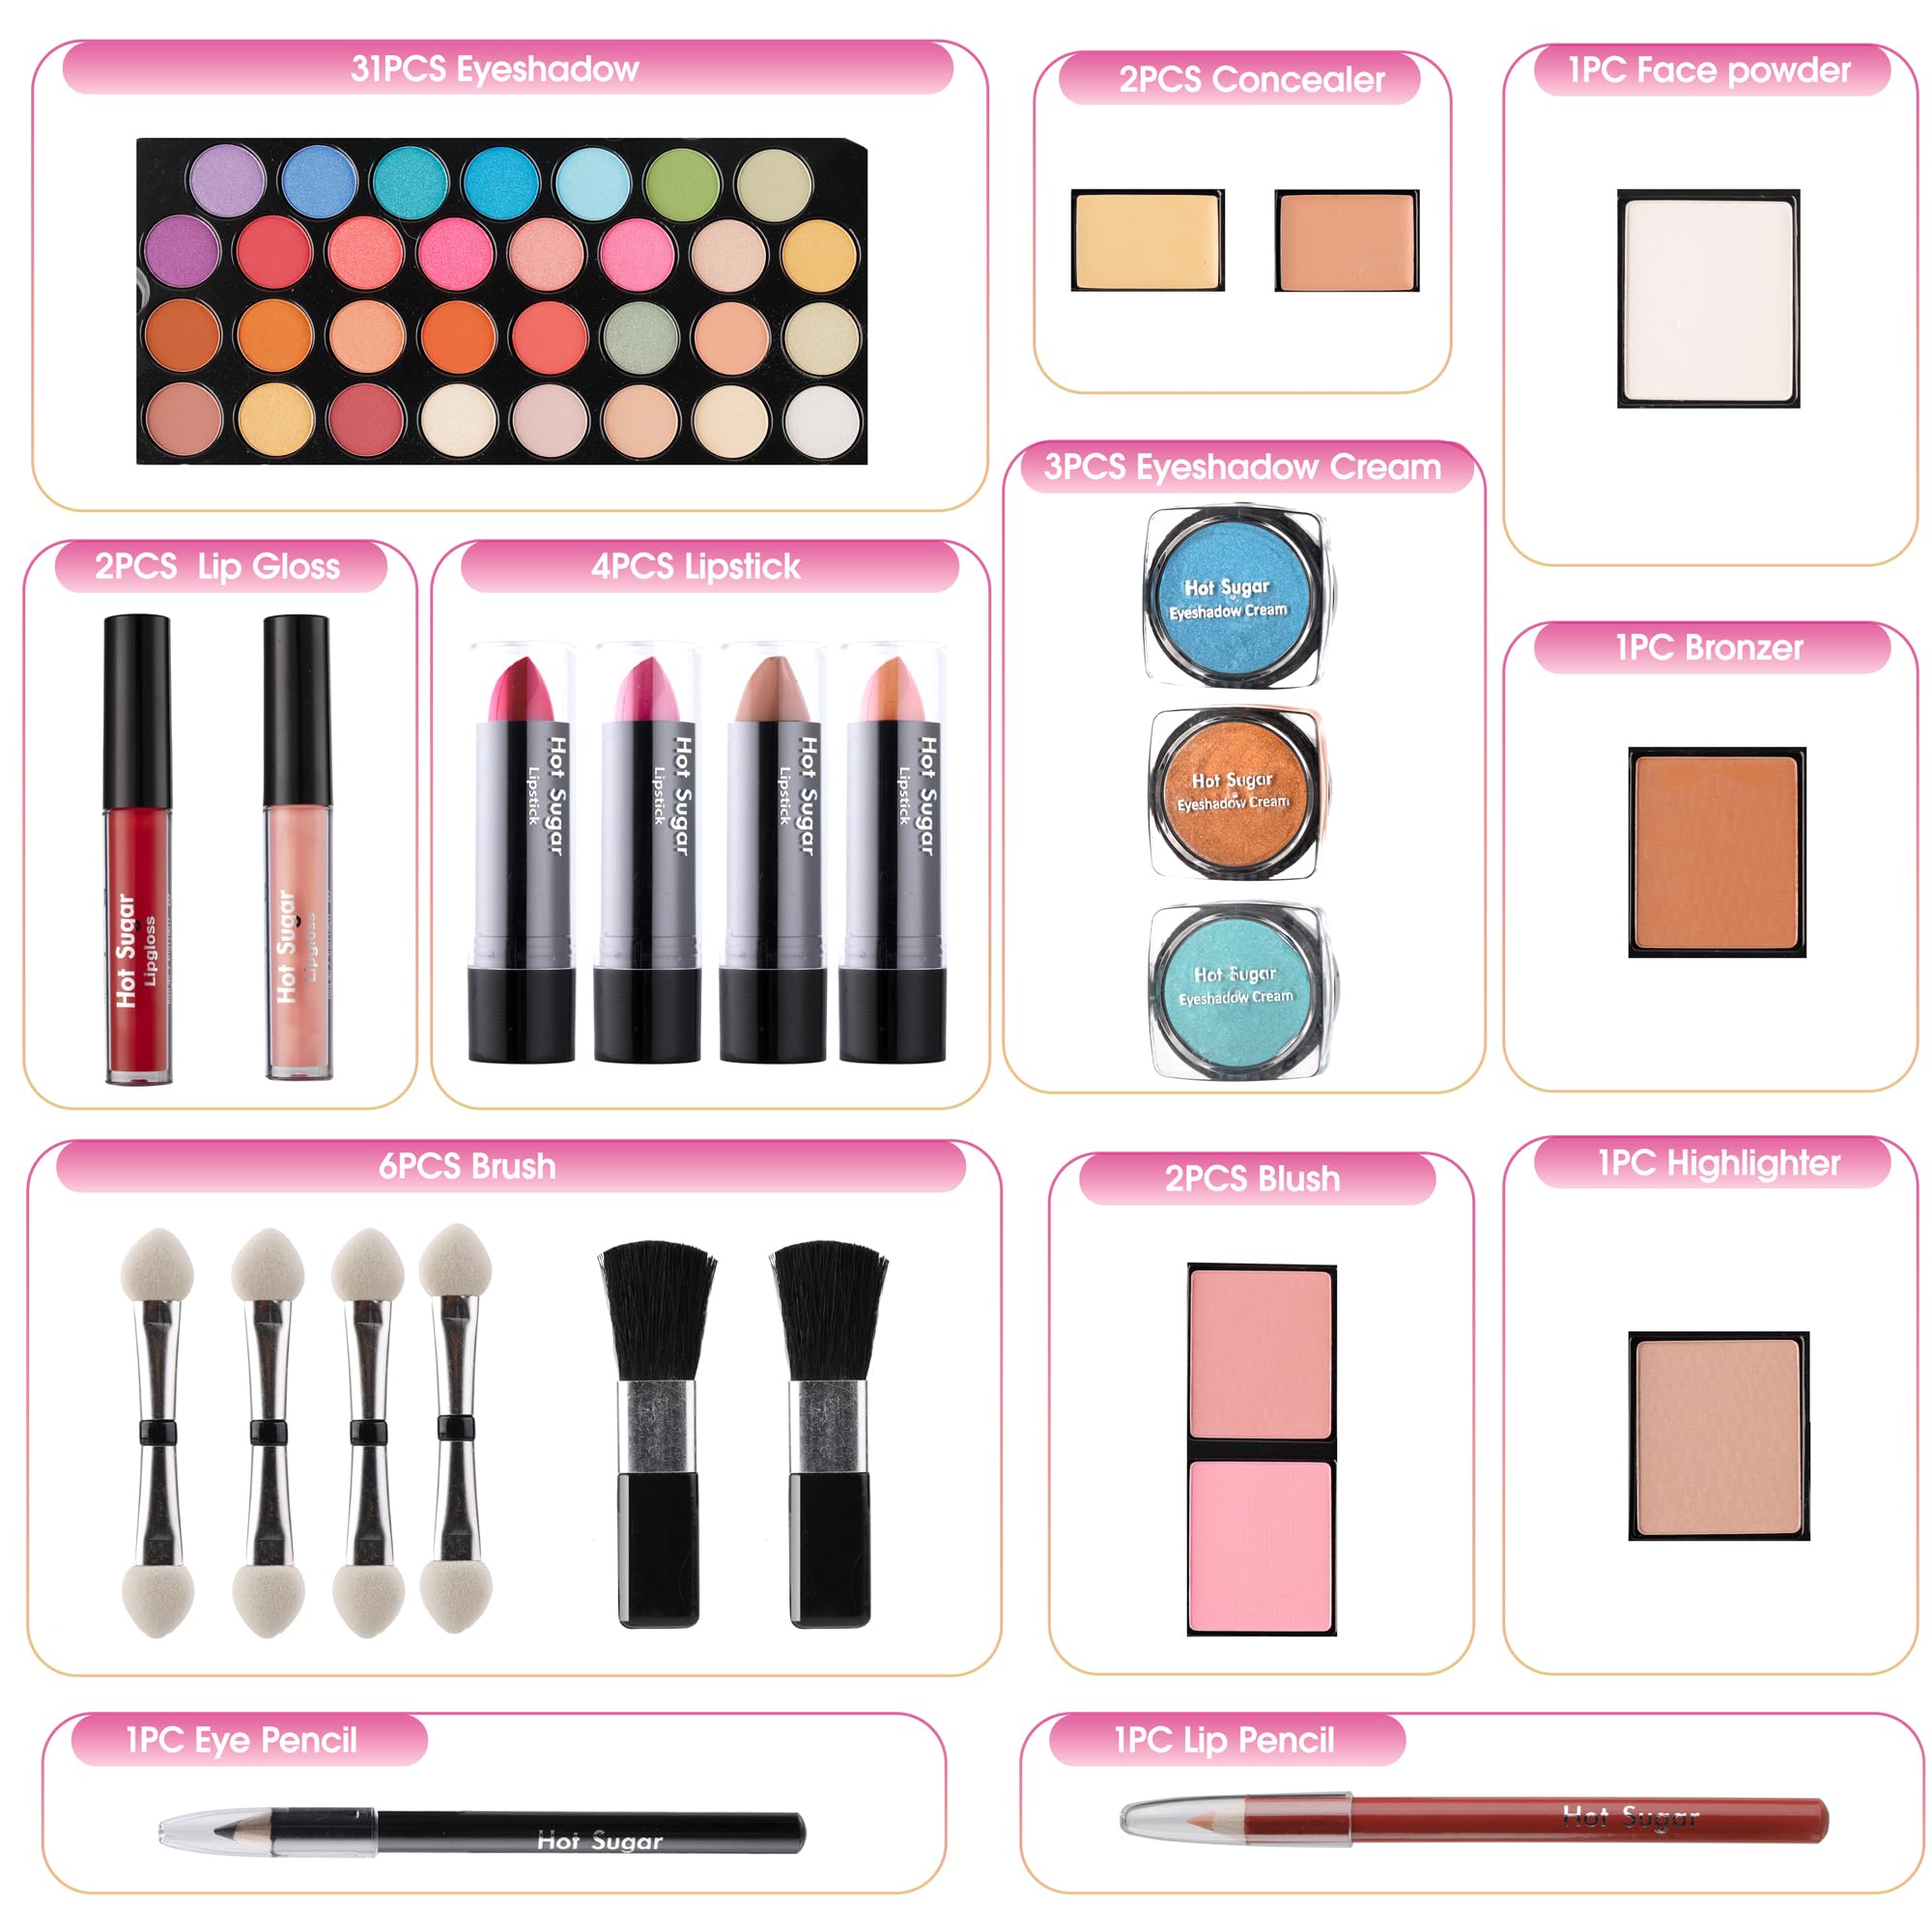 Hot Sugar Girls Makeup Kit for Birthday Gift, All in One Beginner Makeup Kit for Women Full Kit, Christmas Makeup Set for Teens 10 12 13 16 Includes Real Cosmetics and Makeup Tools (PINK)